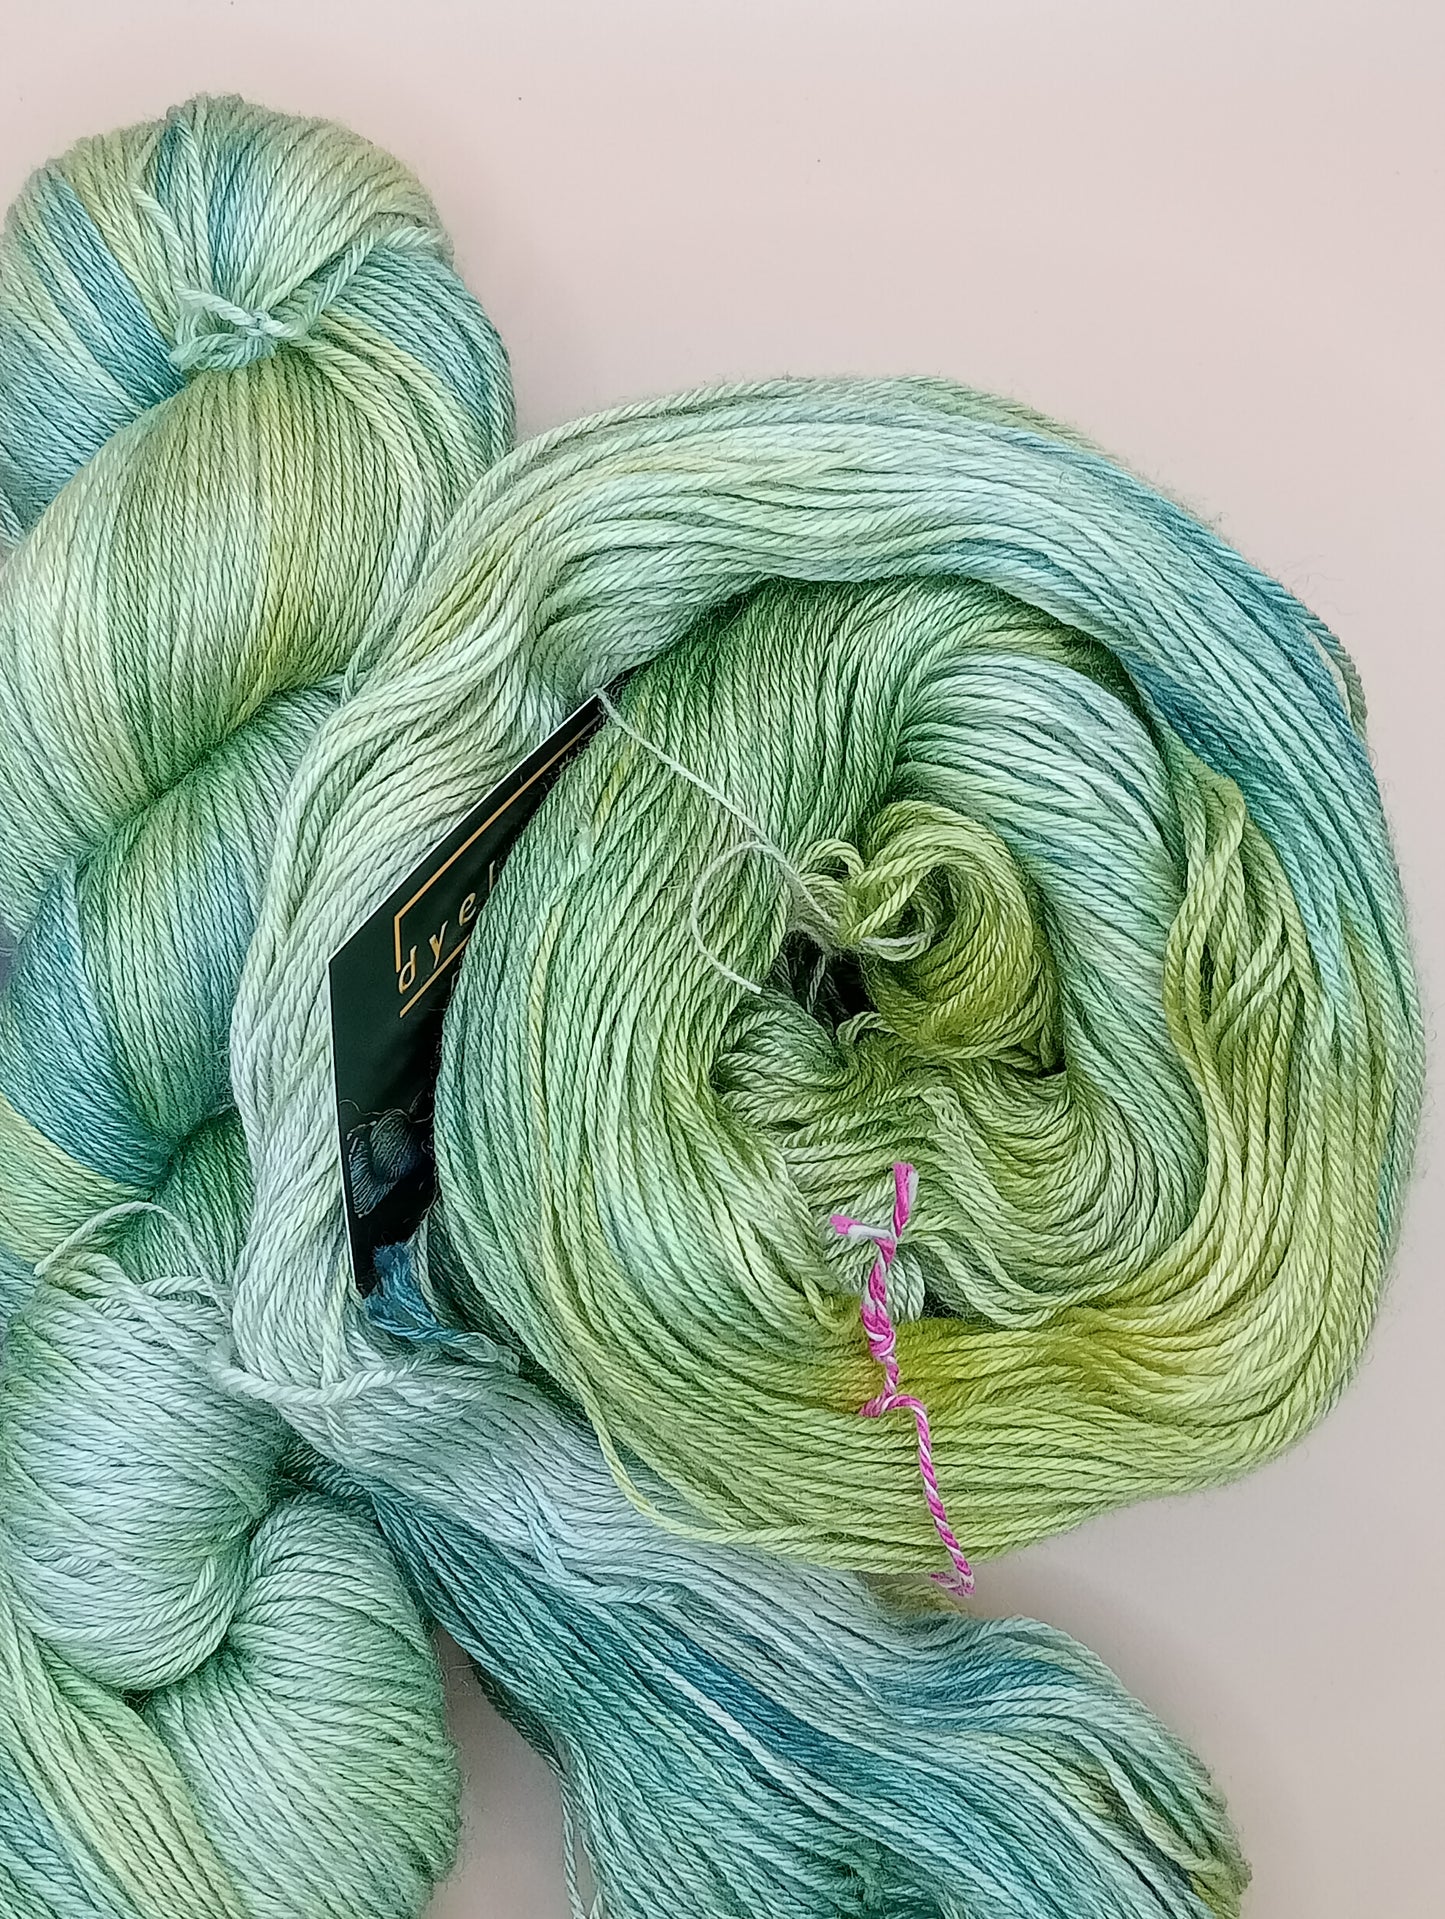 100G Bluefaced Leicester/Silk hand dyed 4 ply Yarn- "Evergreen Amaryllis"